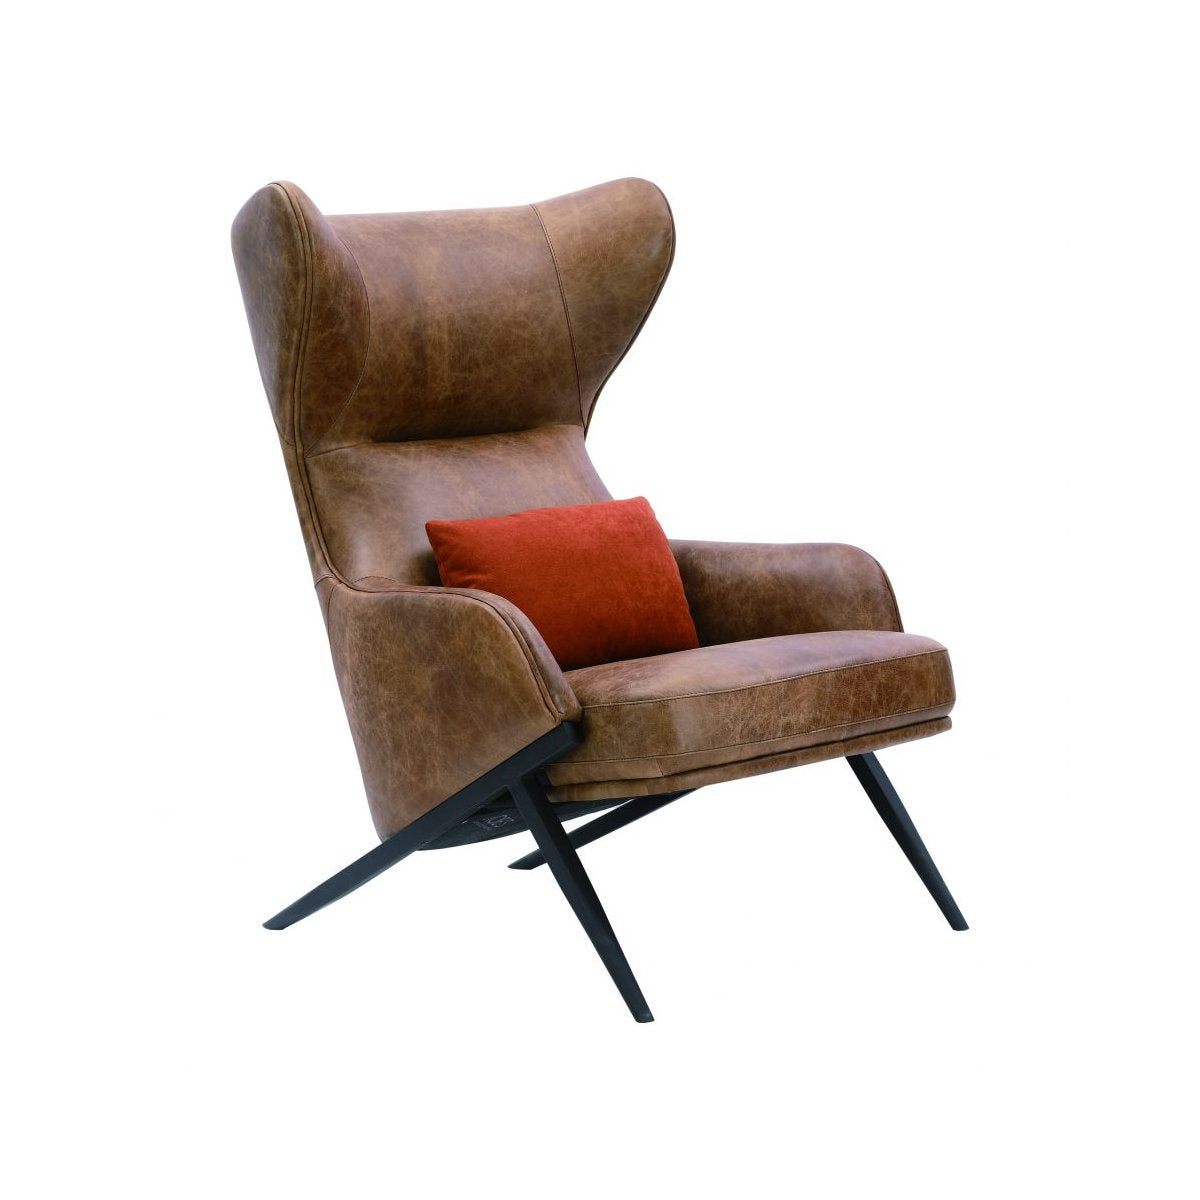 Load image into Gallery viewer, Amos Leather Accent Chair Occasional Chairs Moe&amp;#39;s     Four Hands, Burke Decor, Mid Century Modern Furniture, Old Bones Furniture Company, Old Bones Co, Modern Mid Century, Designer Furniture, https://www.oldbonesco.com/
